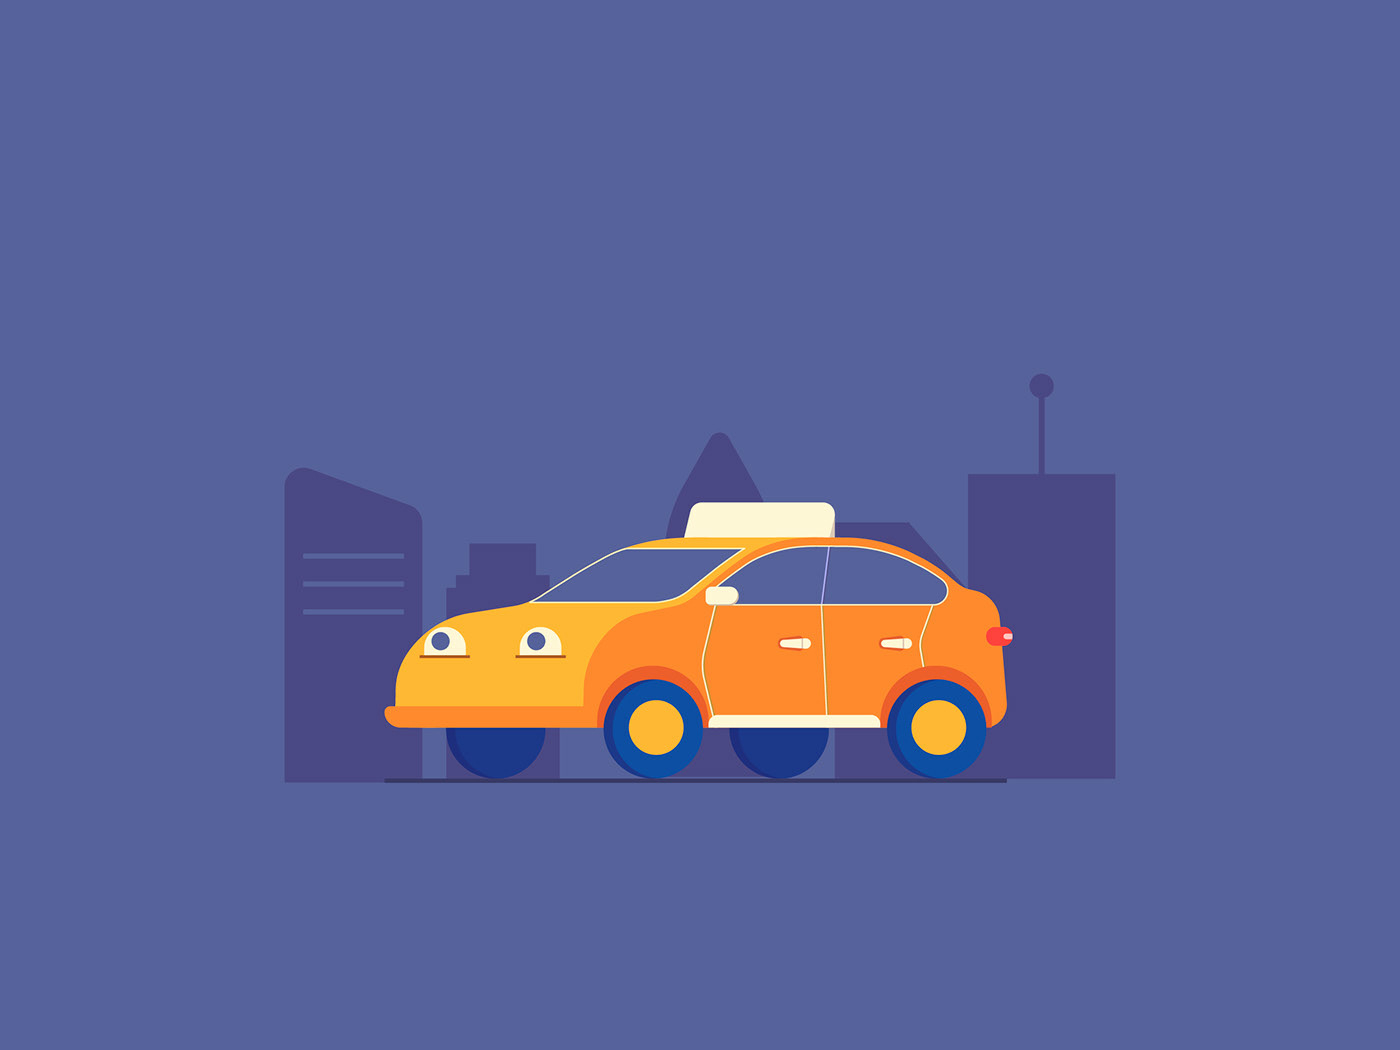 Taxi by Maxim Aletkin on Dribbble